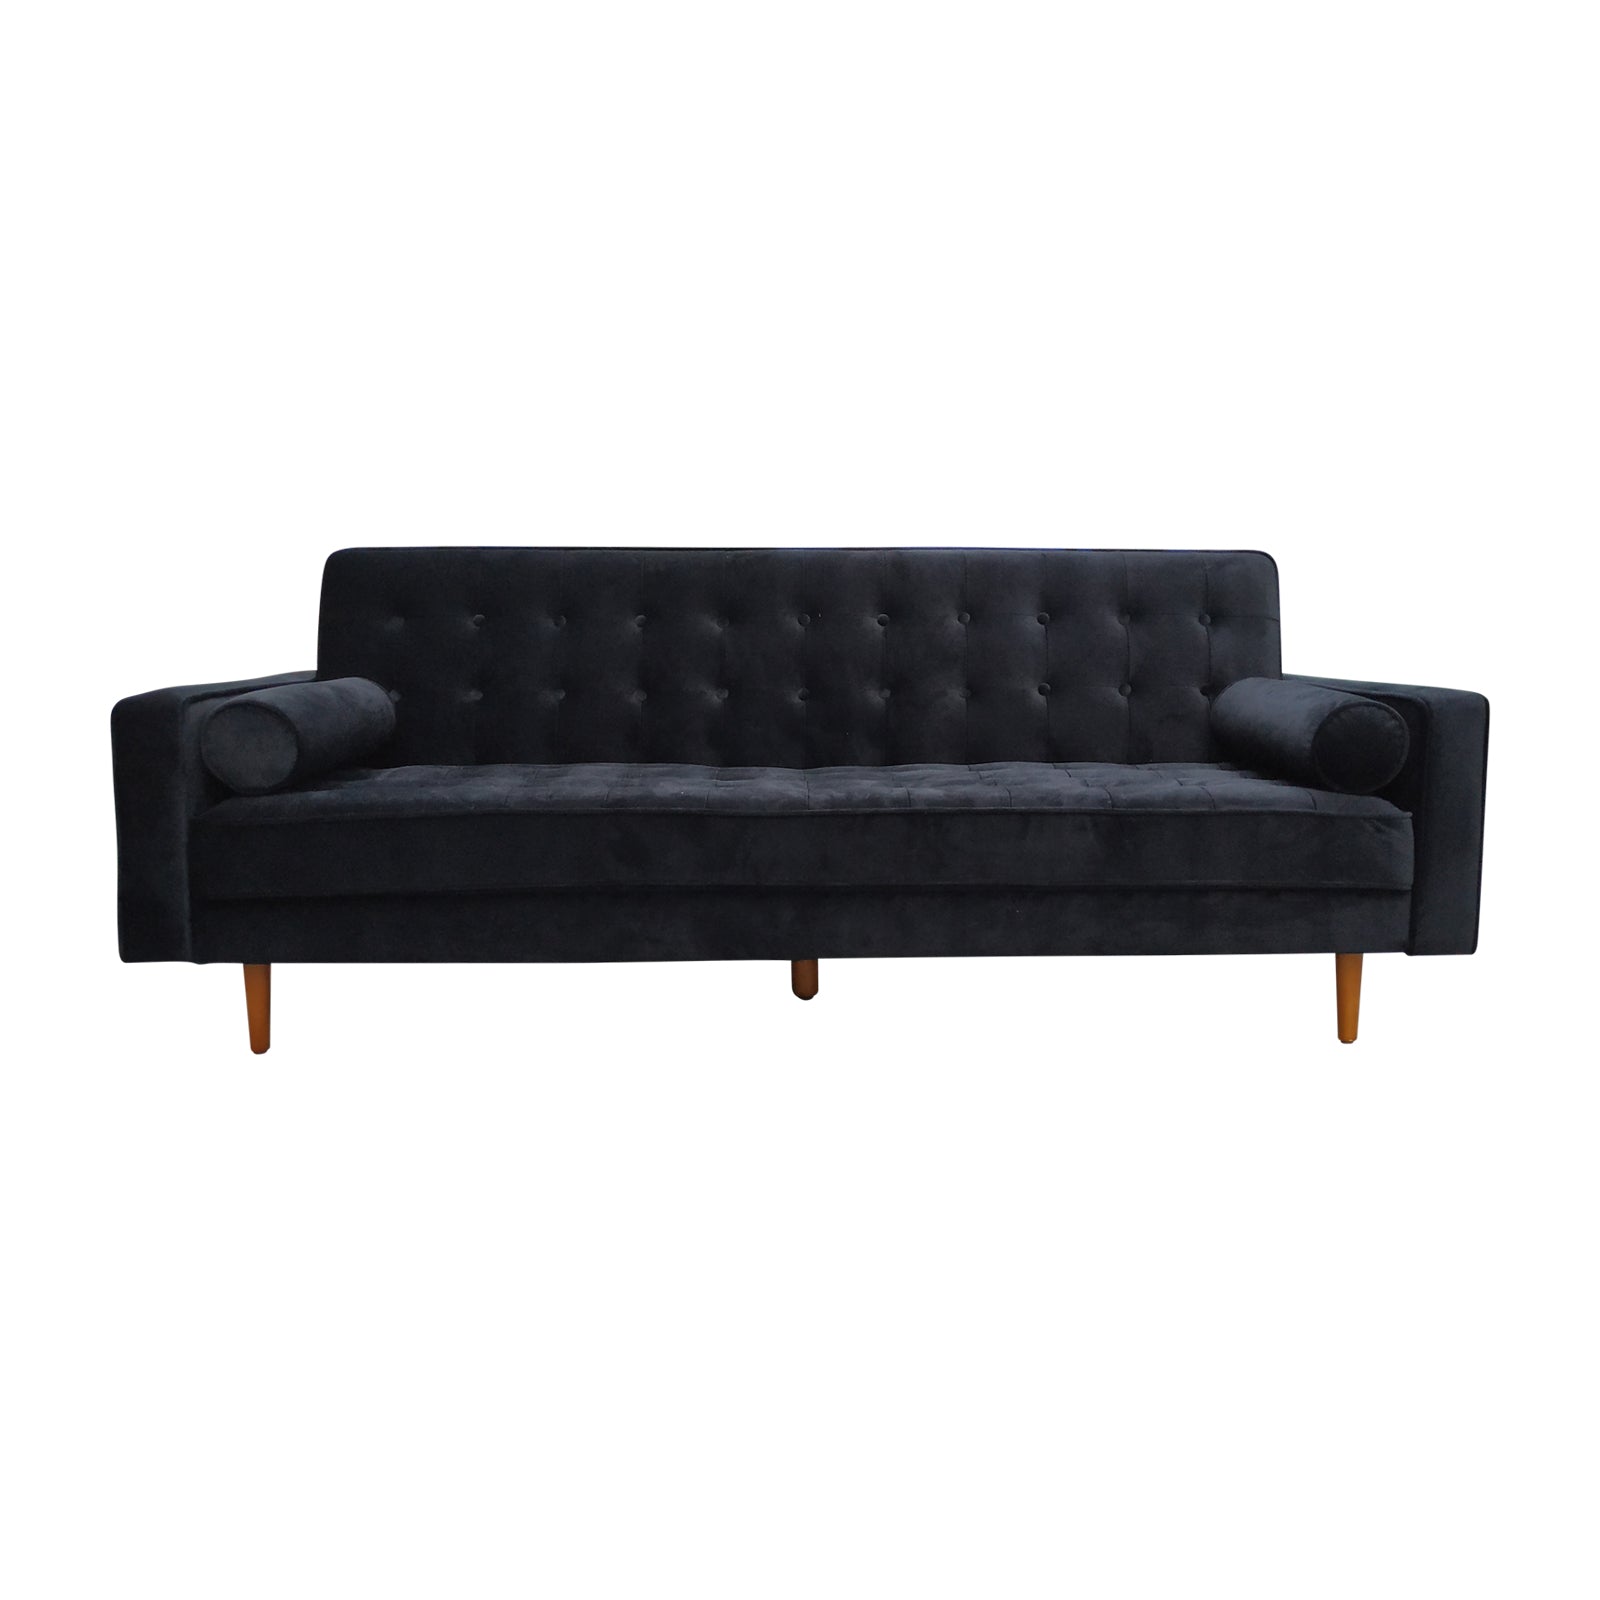 Back In Stock! Sofa Bed 3 Seater Button Tufted Lounge Set in Velvet Black Colour